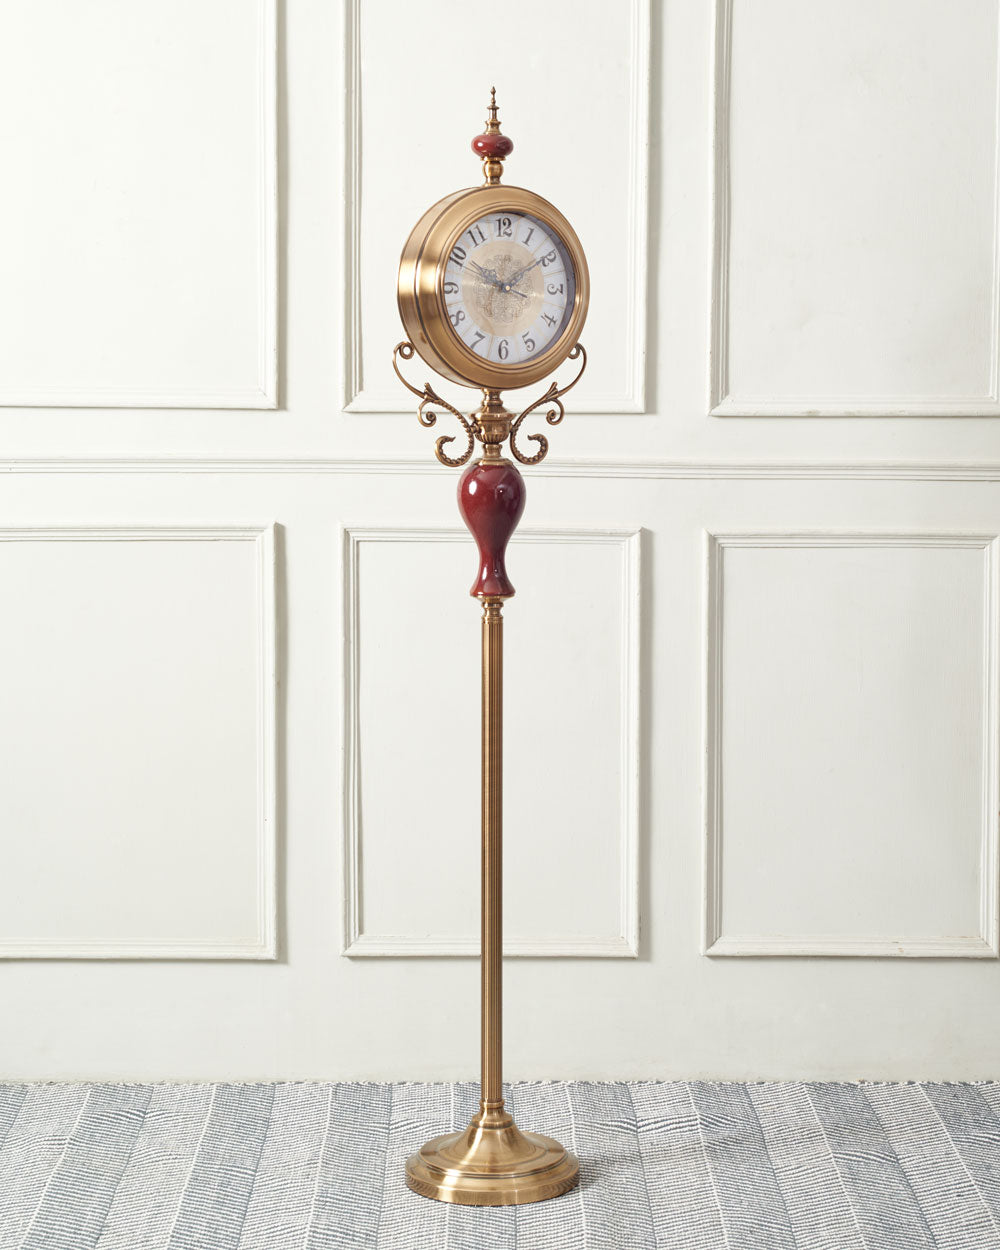 Grand 'Seville' decorative floor clock with red column and gold accents, blending with opulent home themes.